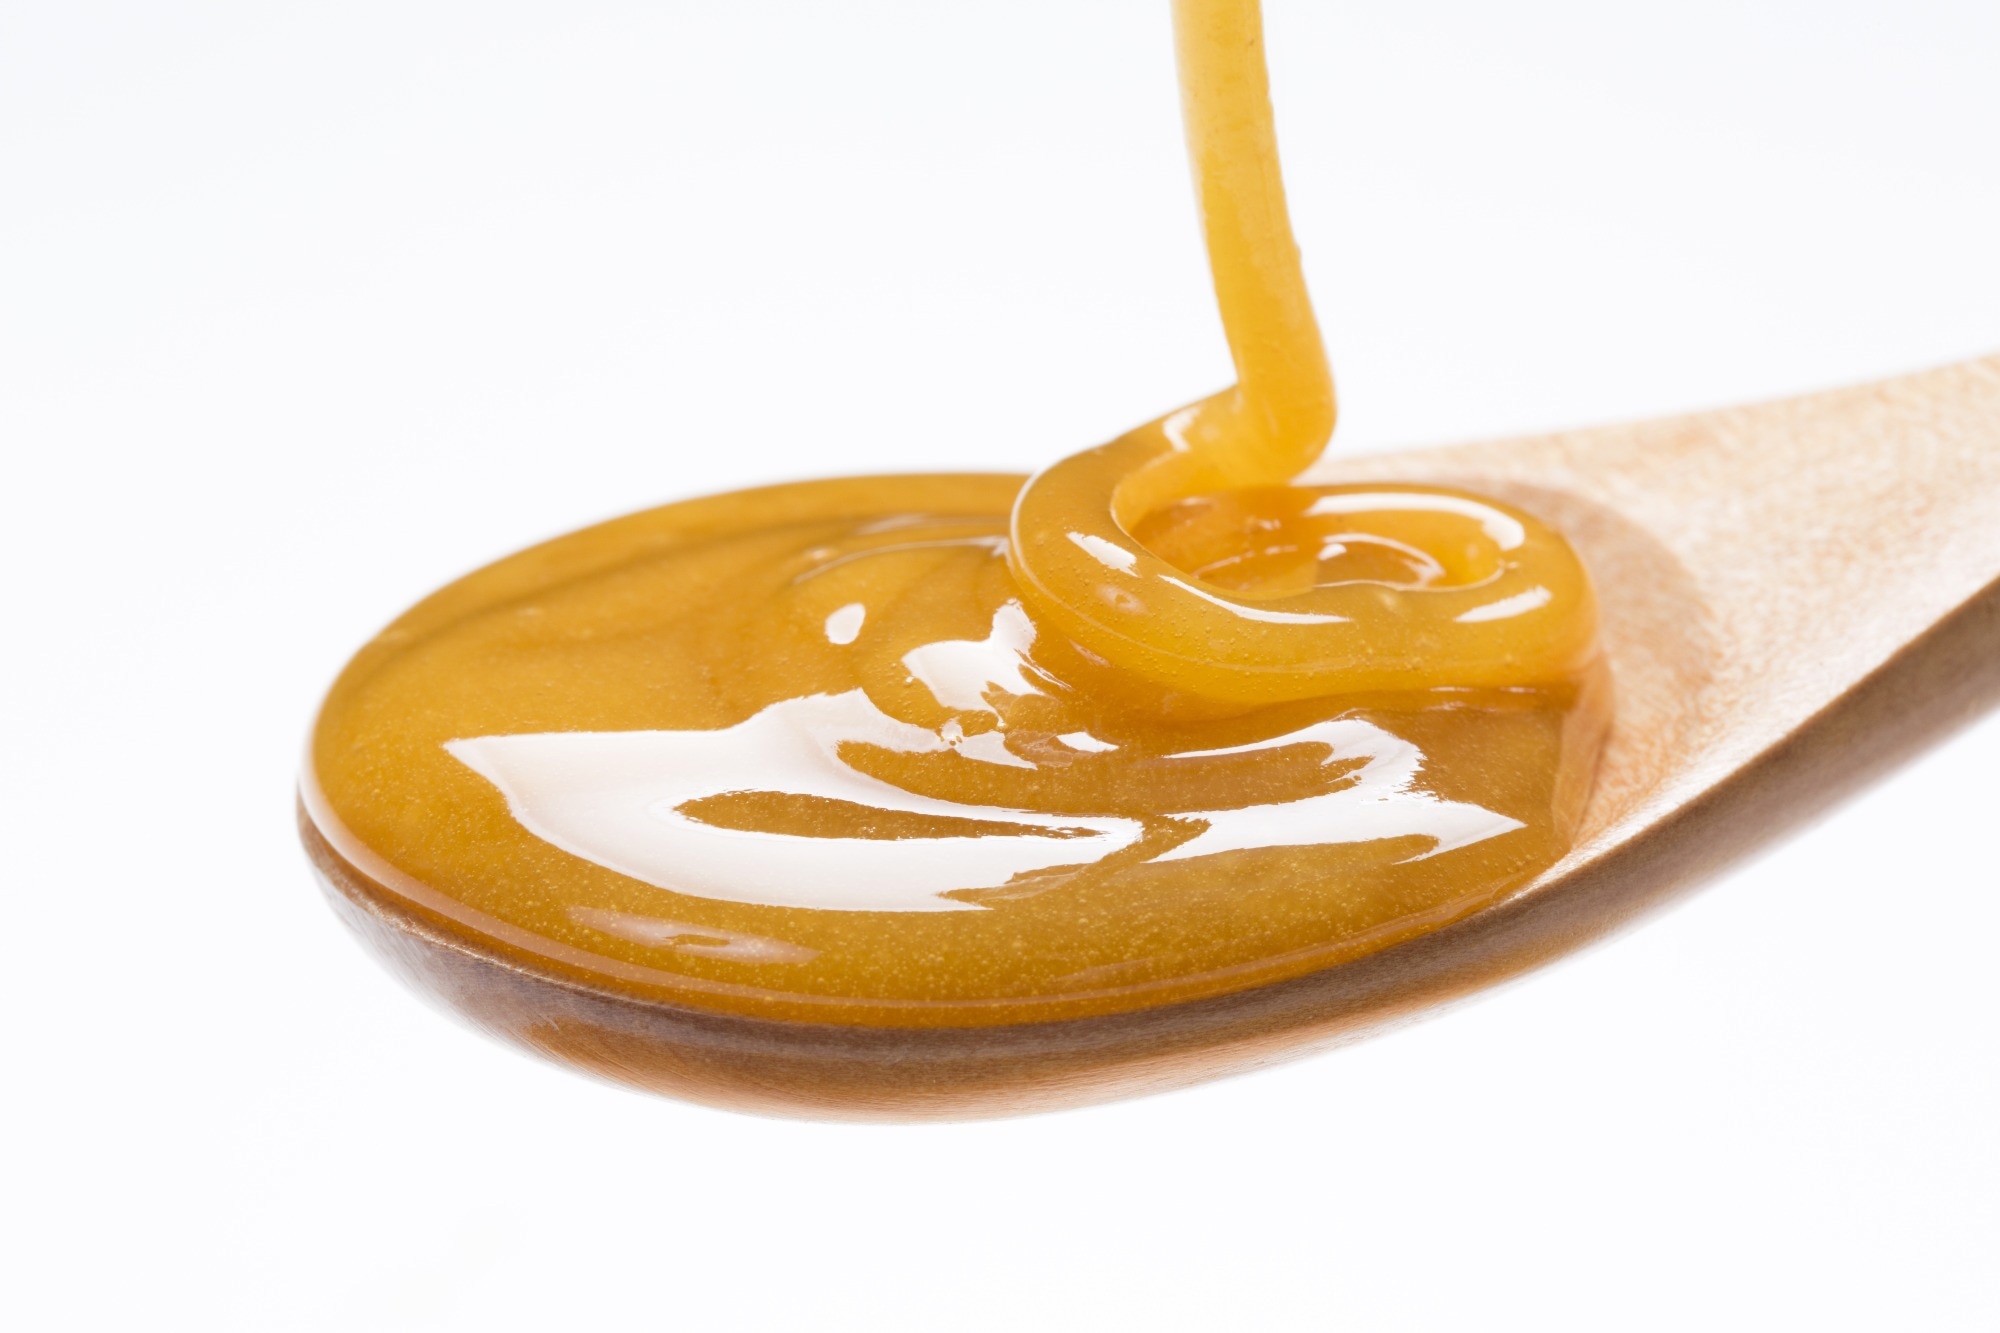 In vitro synergy between manuka honey and amikacin against Mycobacterium abscessus complex shows potential for nebulisation therapy. Image Credit: HikoPhotography / Shutterstock